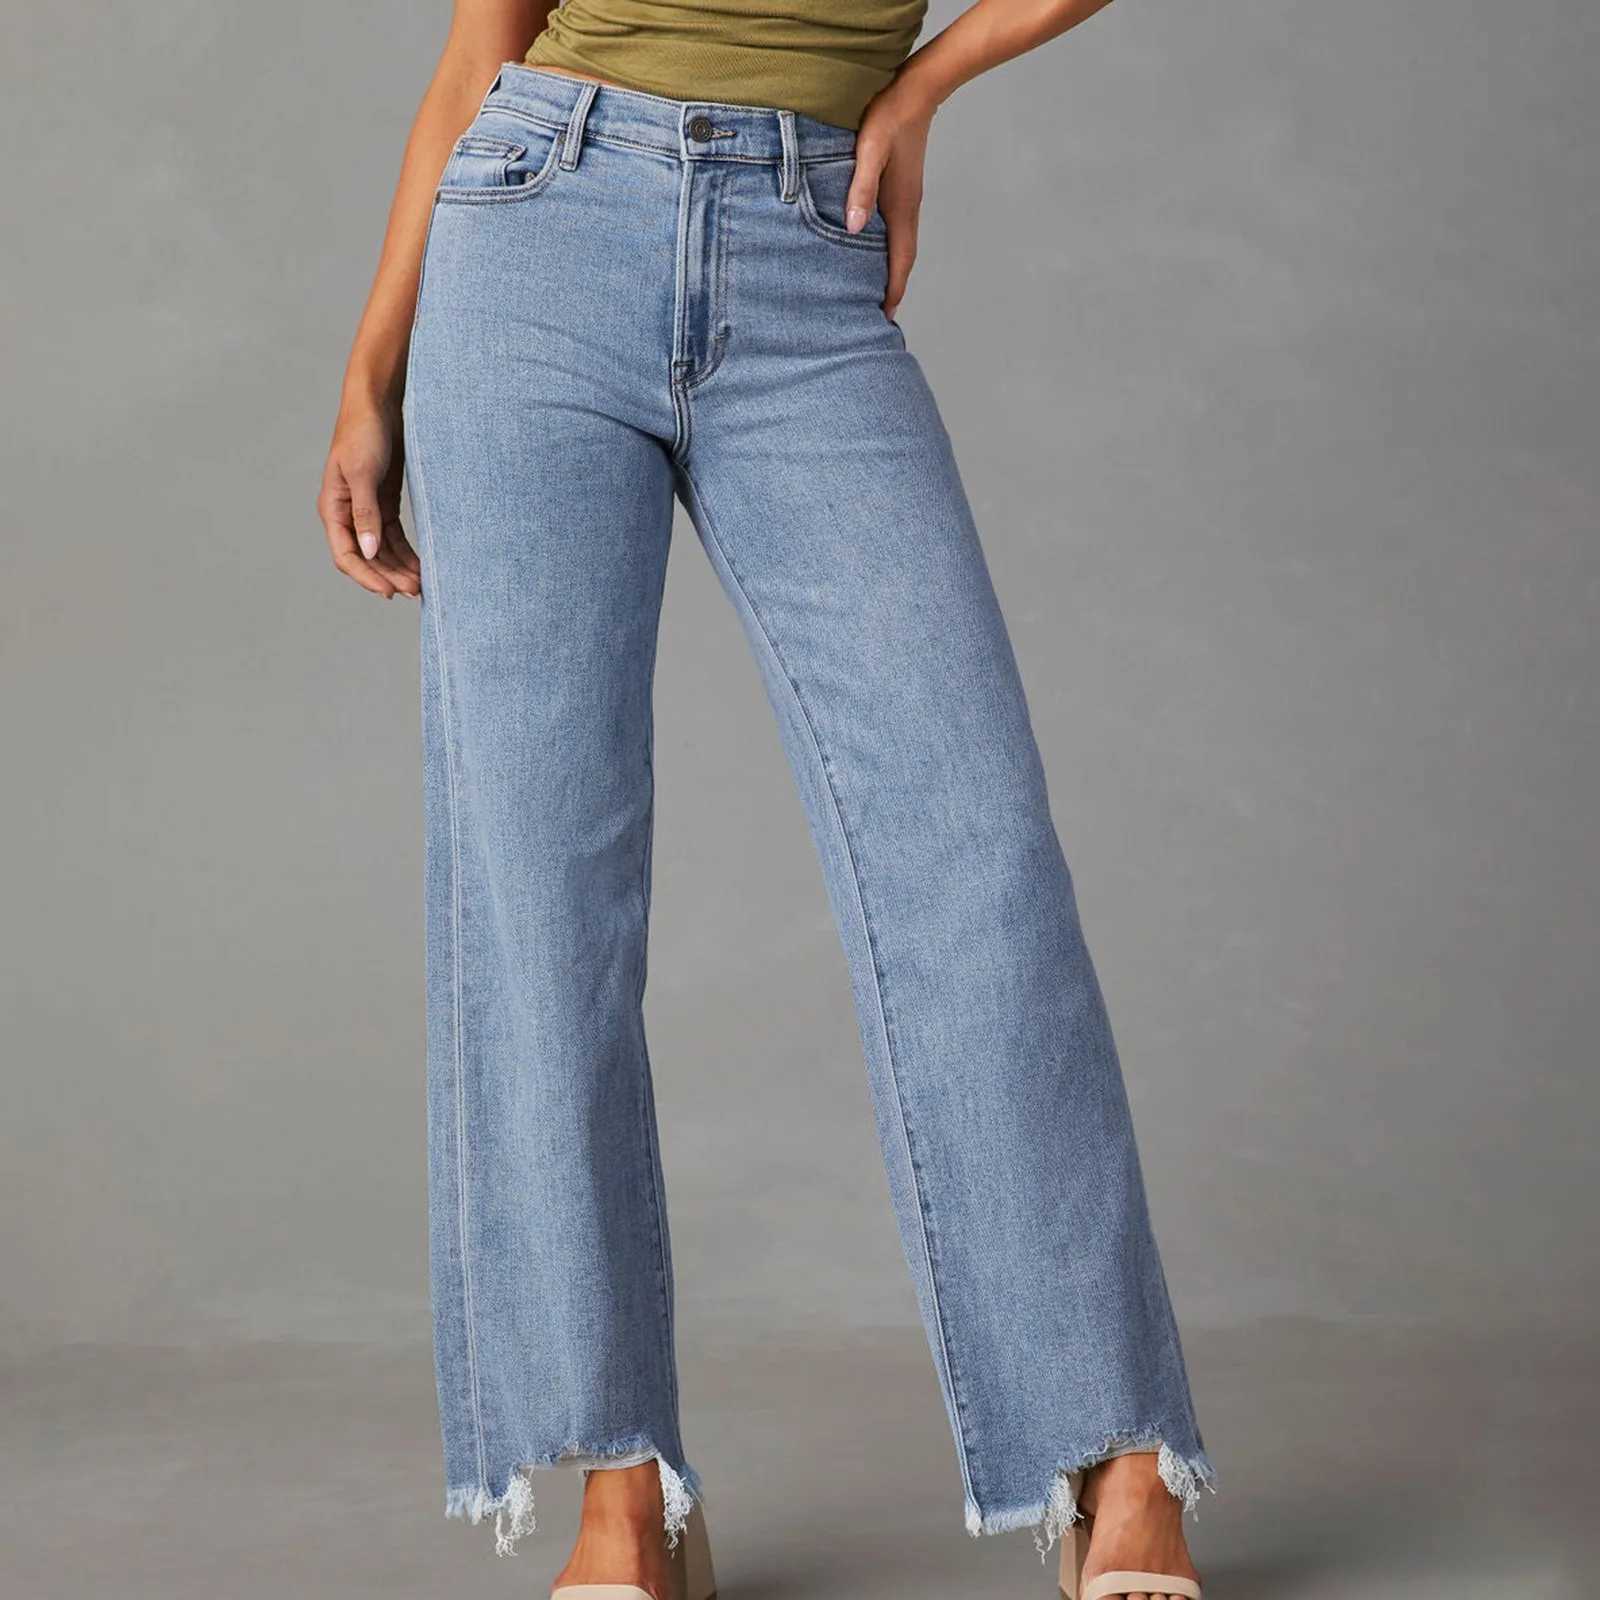 Women's Pants Capris Fringed Straight Denim Trousers For Ladies Pants Comfortable Soft Casual Jeans Wide Leg Trousers Fashion Straight Jeans 2023 Y240504